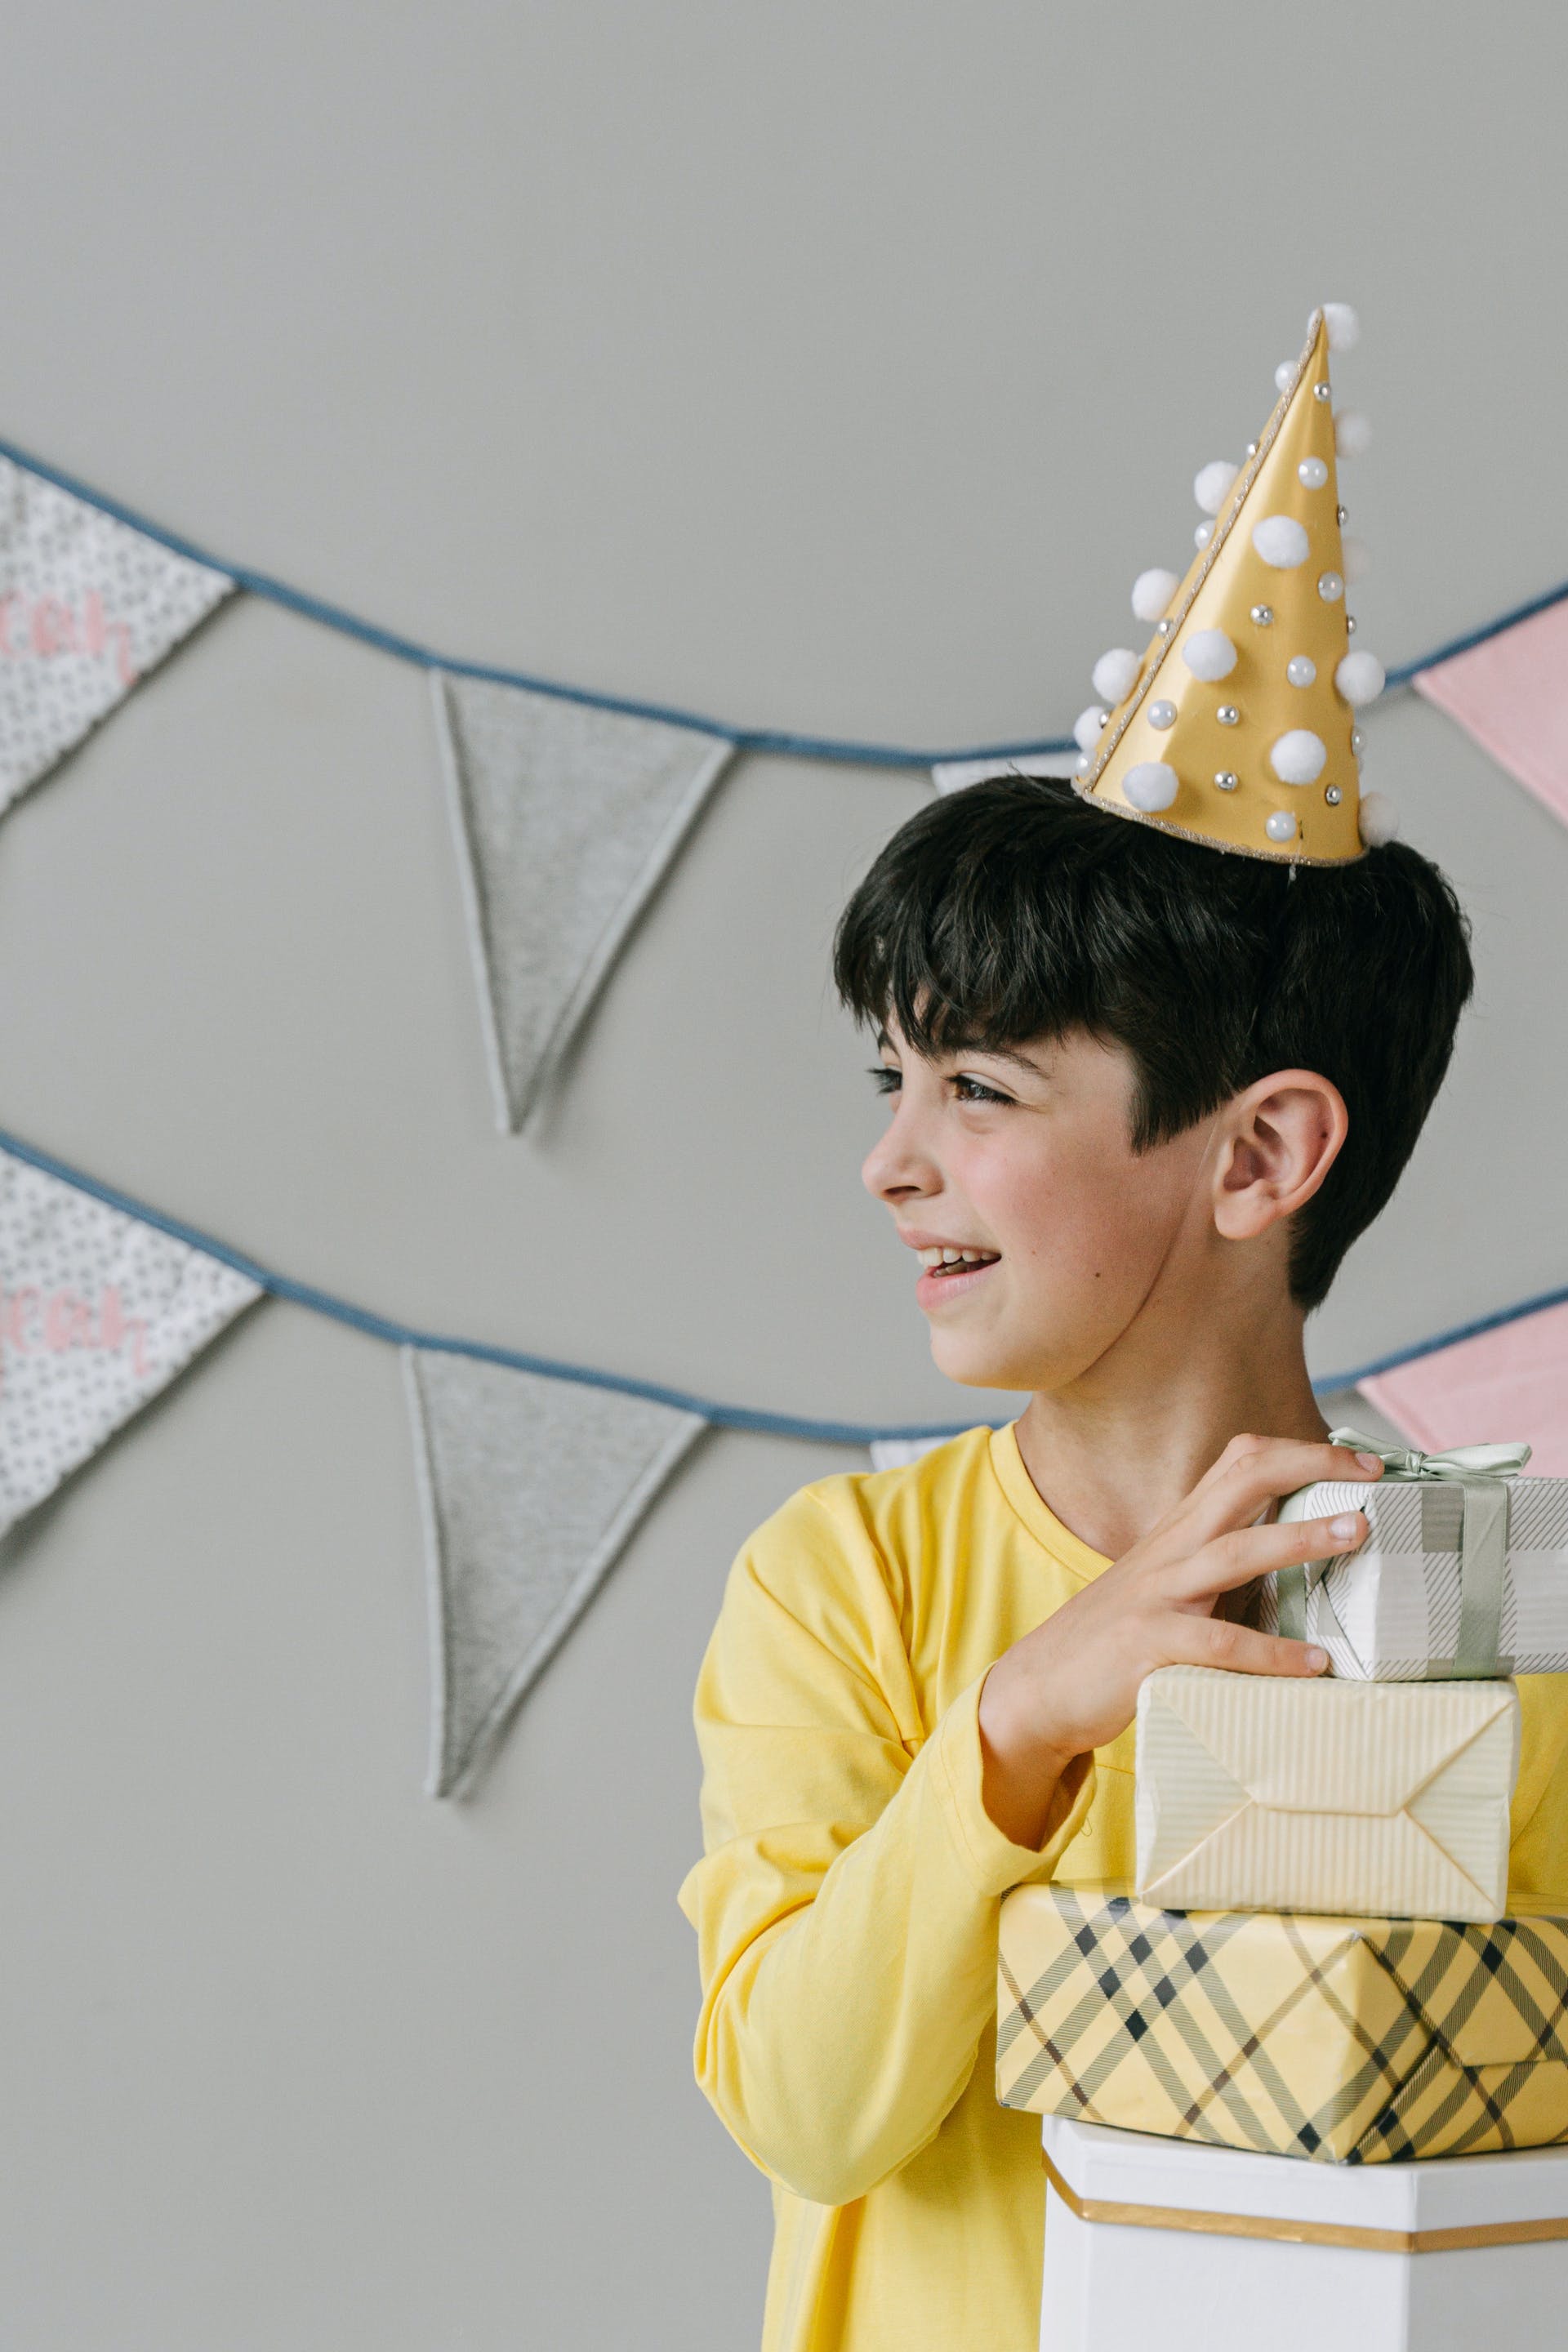 A young boy holding his birthday presents | Source: Pexels